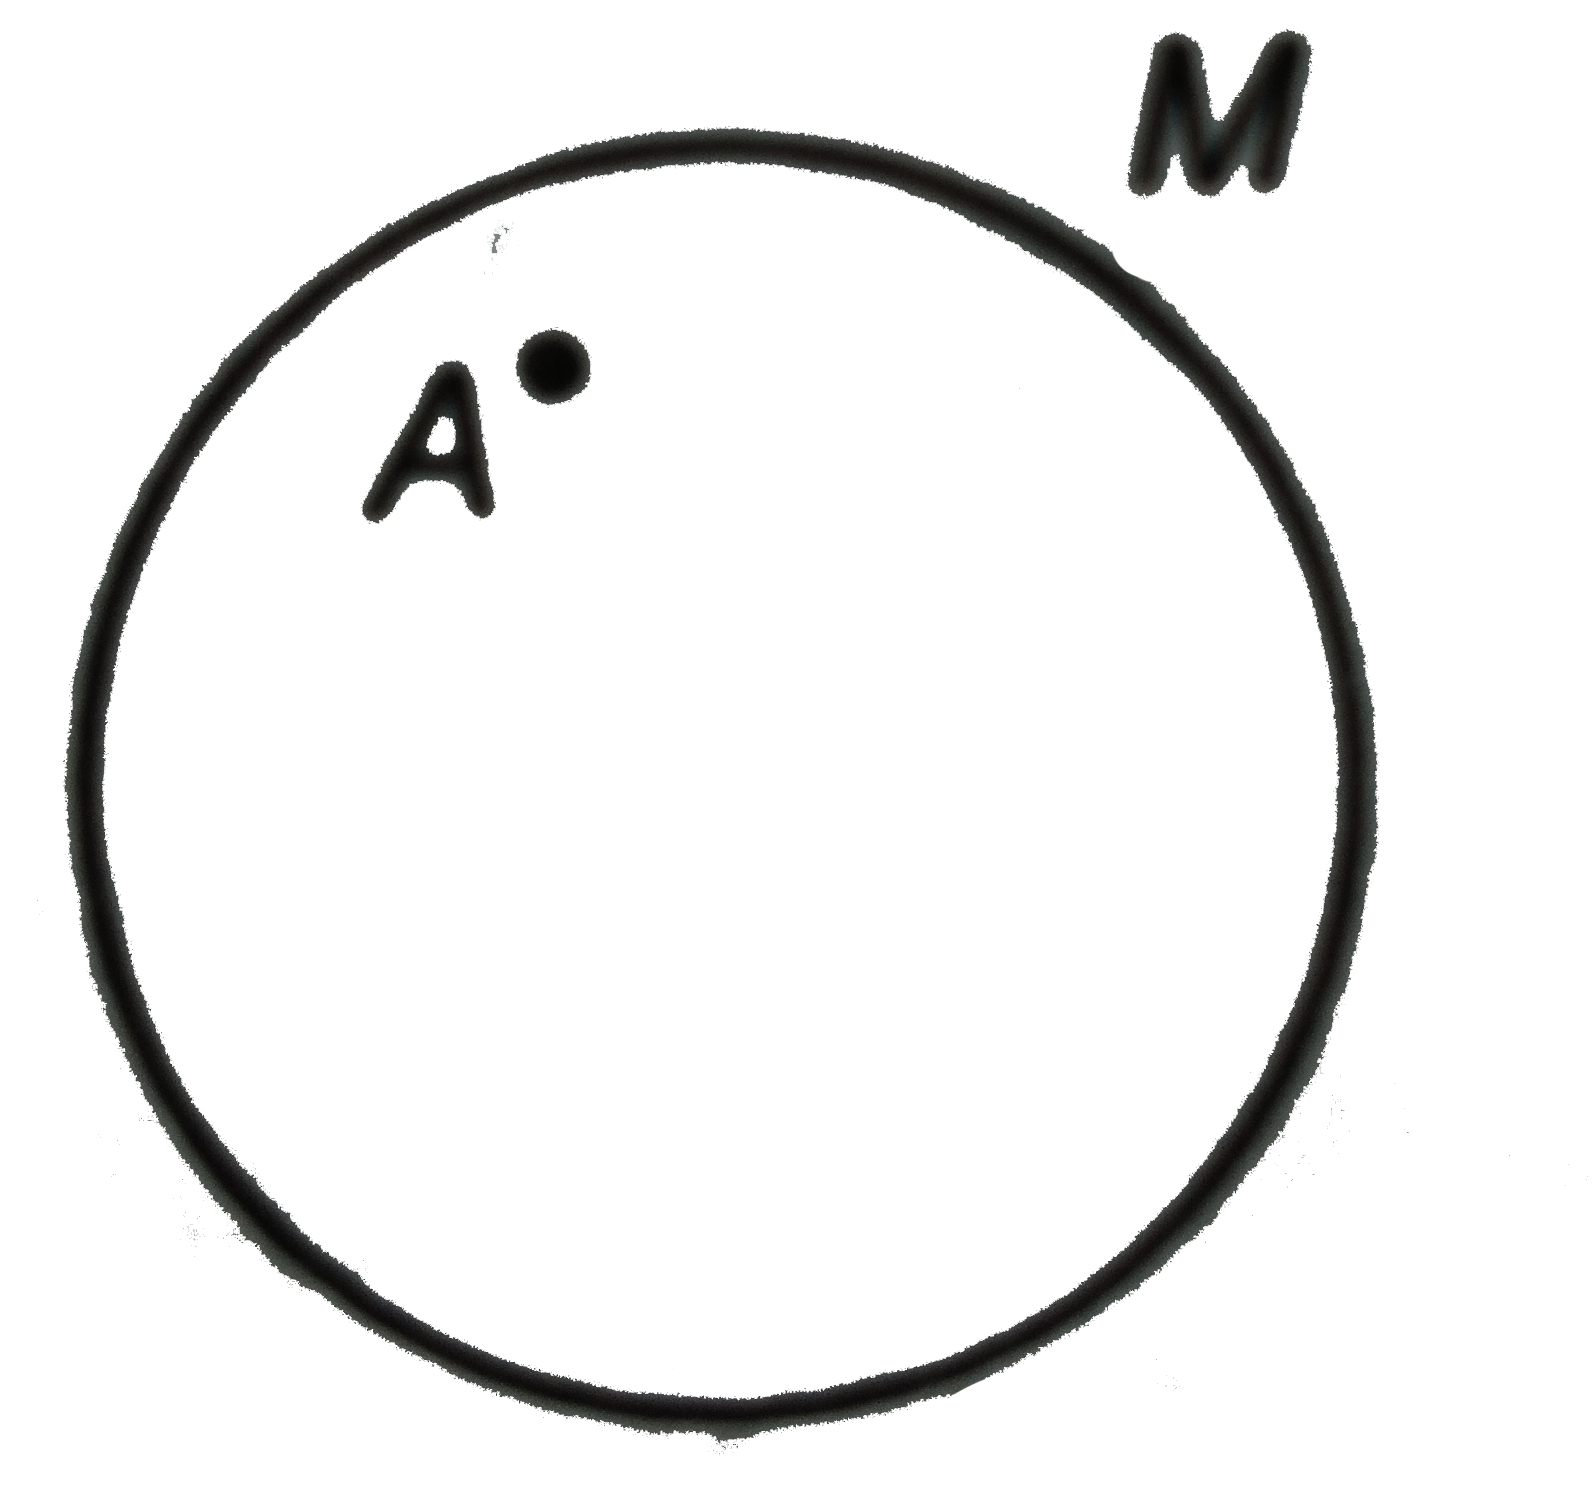 The figure shows a spherical shell of mass M. The point A is not at the centre but away from the centre of the shell. If a particle of mass m is placed at A, then